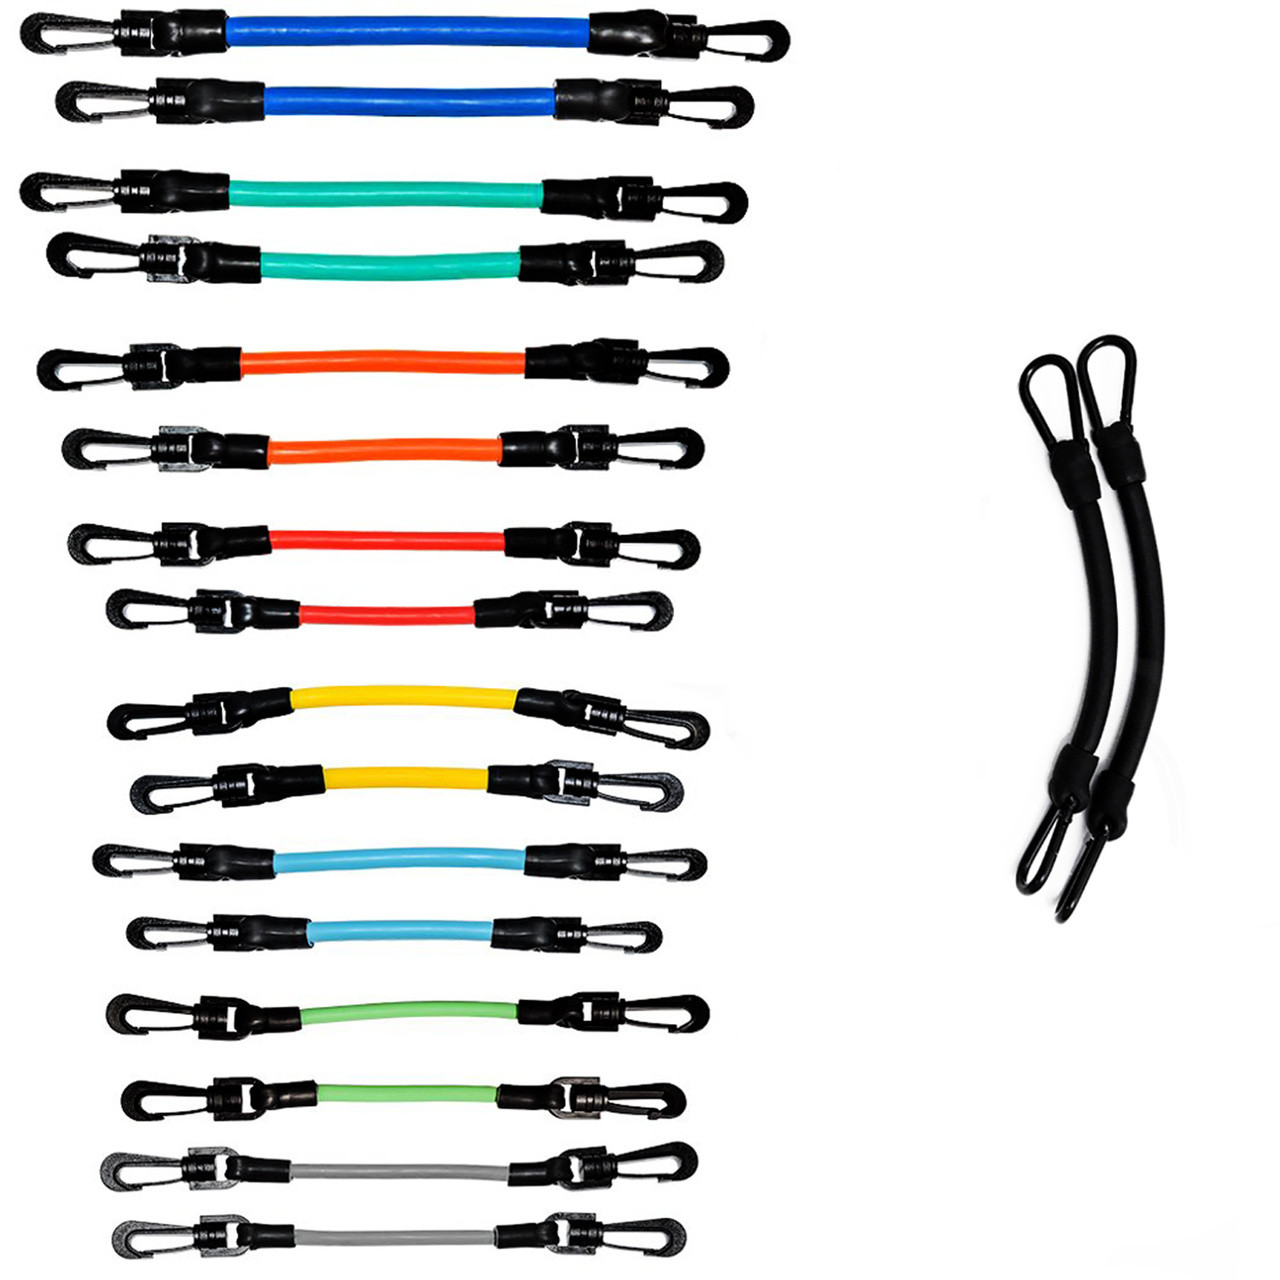 Extra Lower Body Resistance Bands (Kbands)